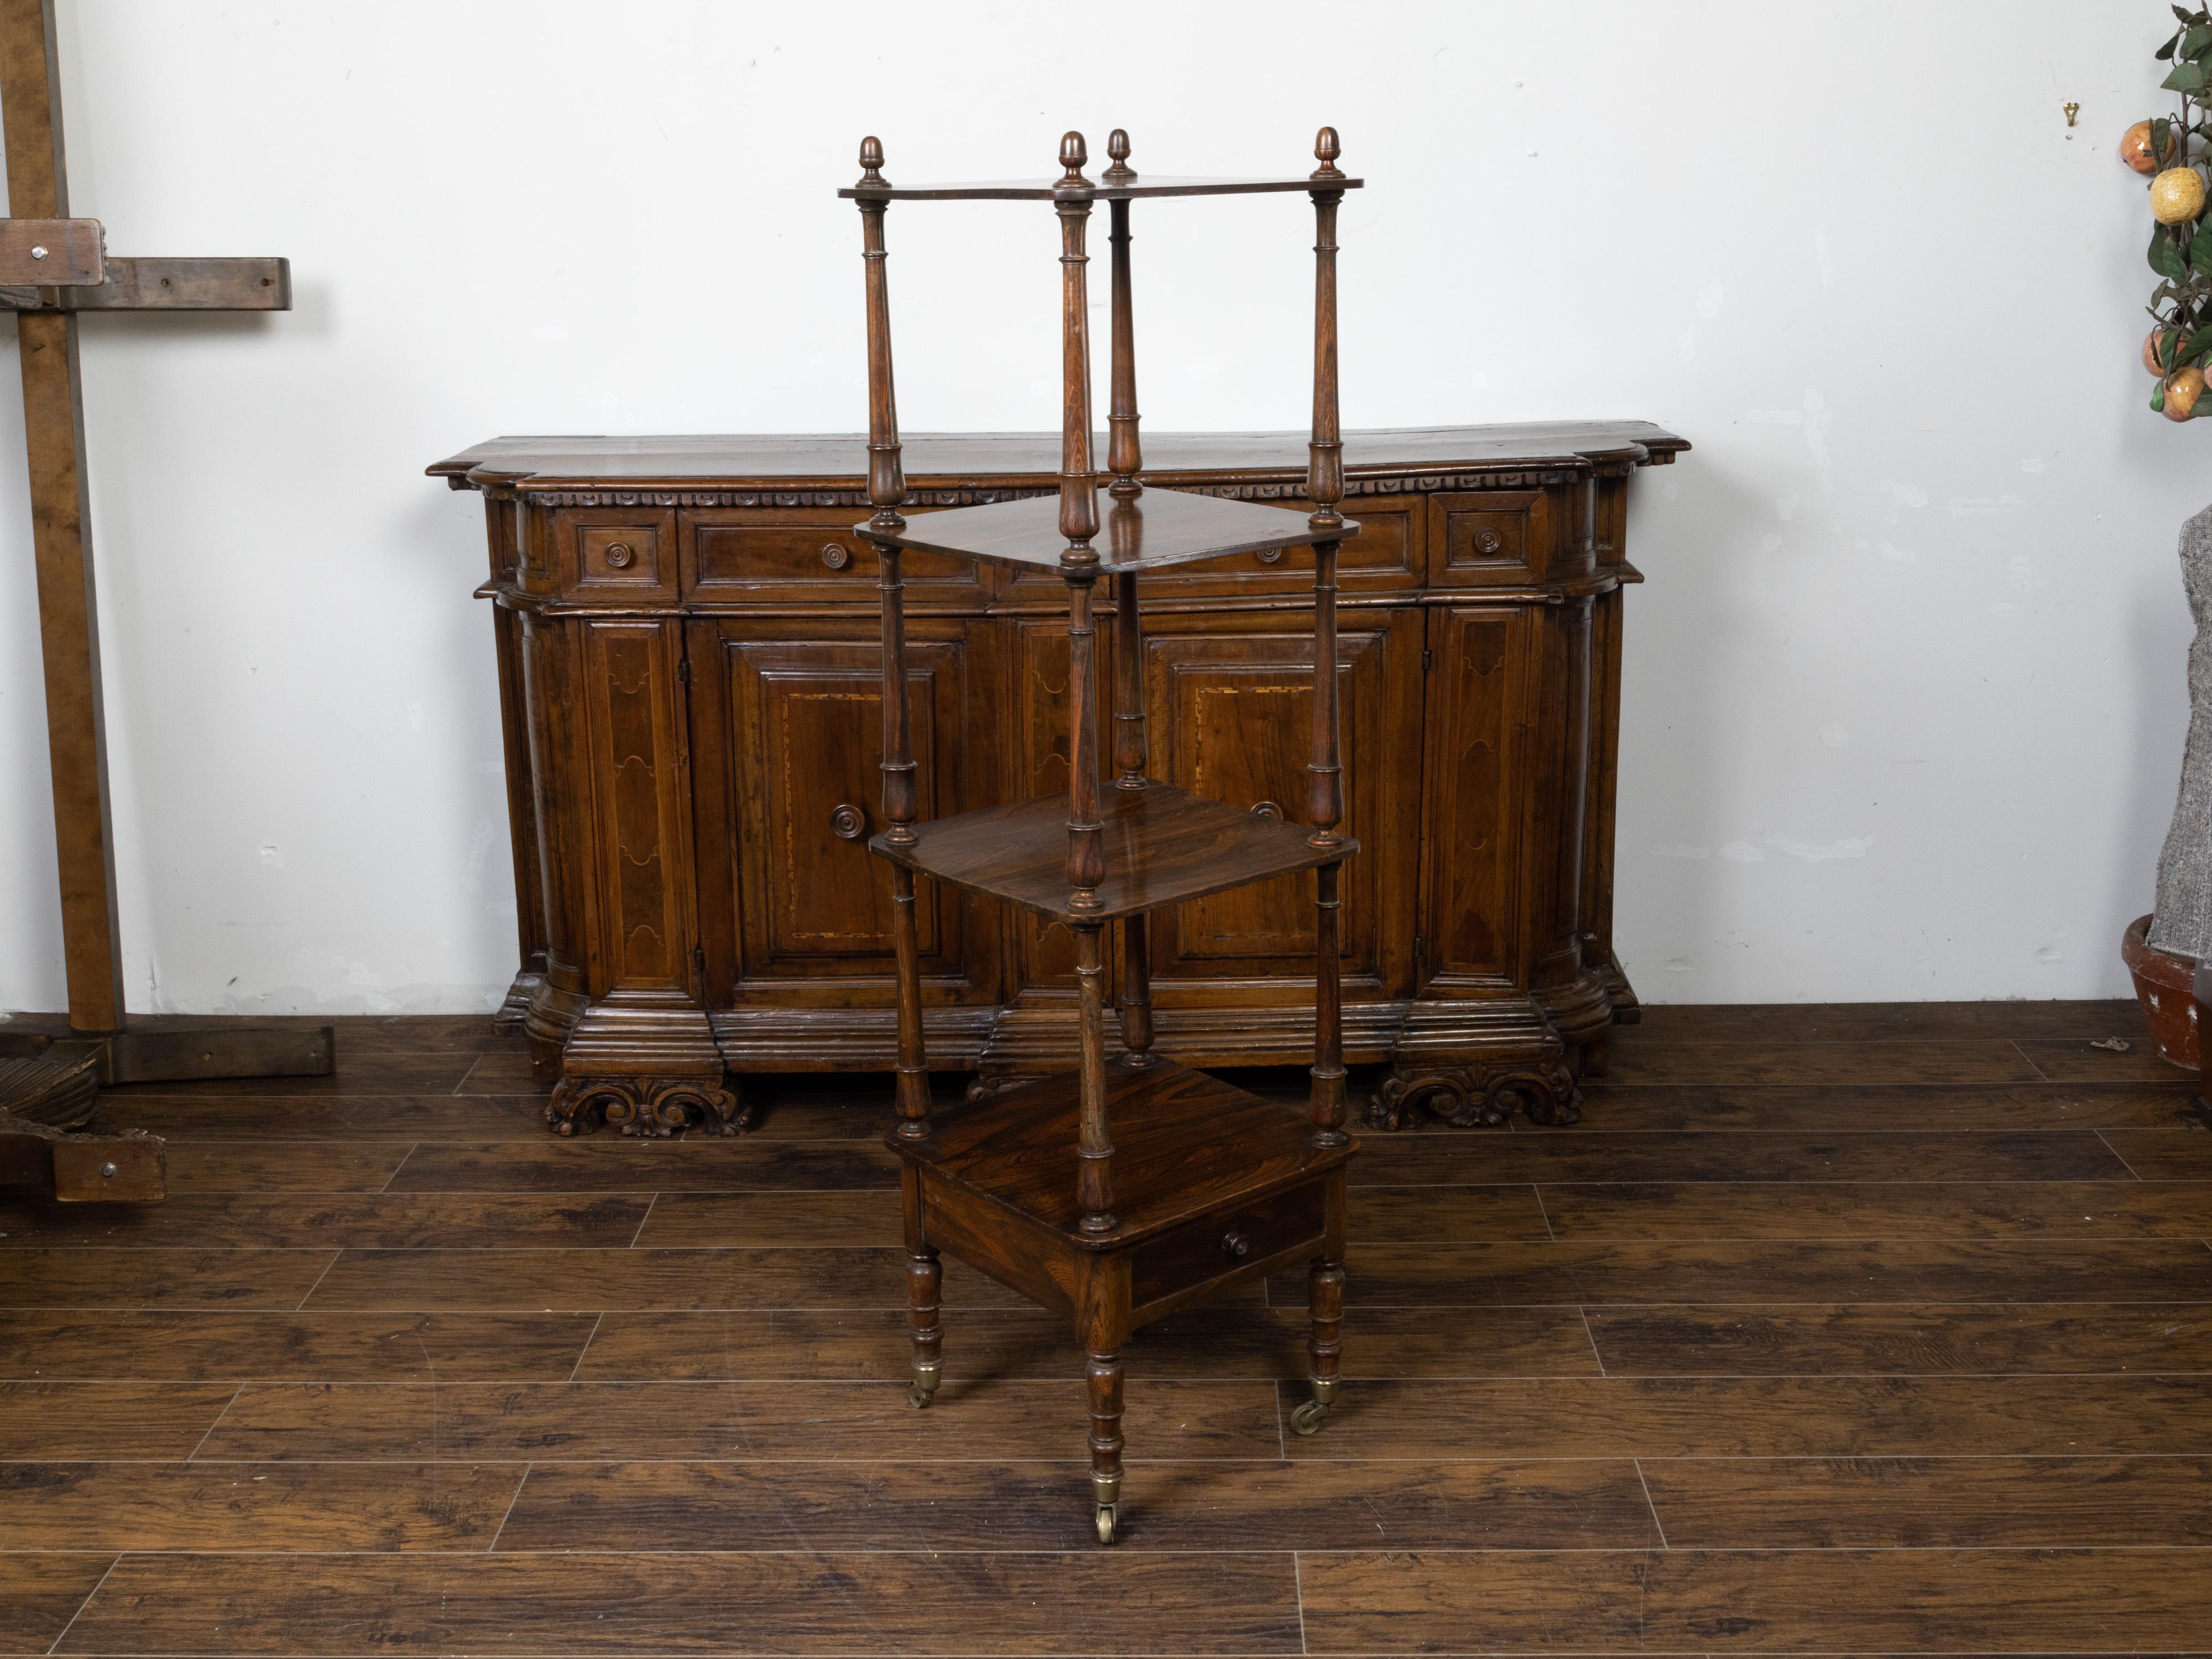 An English wooden trolley from the 19th century, with three shelves, low drawer and turned supports. Created in England during the 19th century, this tall trolley features three square-shaped shelves secured within turned supports topped with acorn